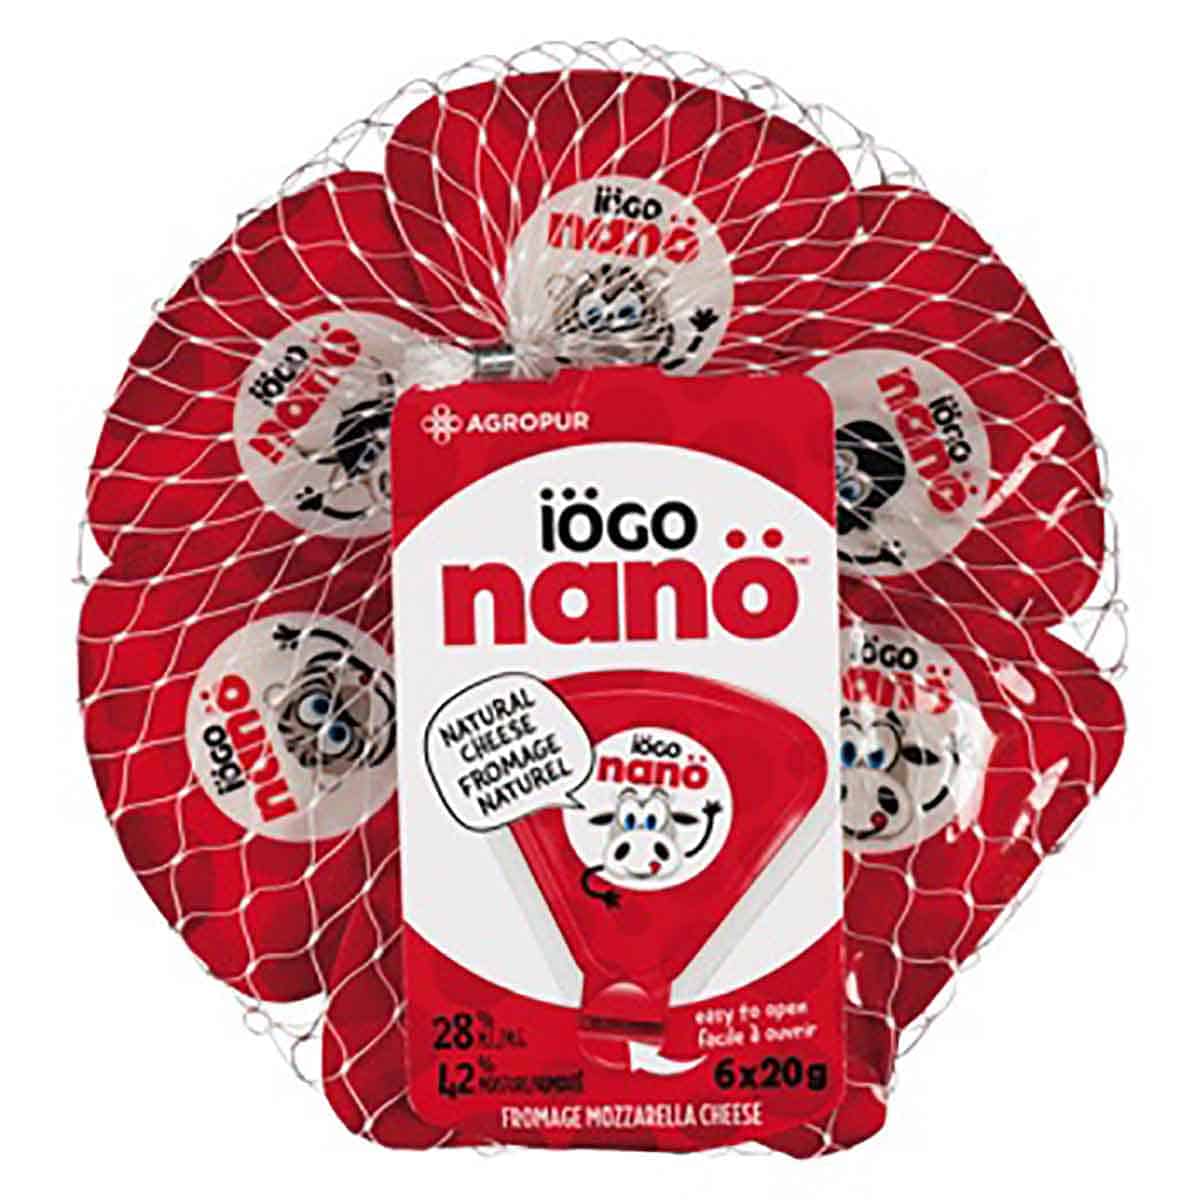 A package of nano cheese rolls. 